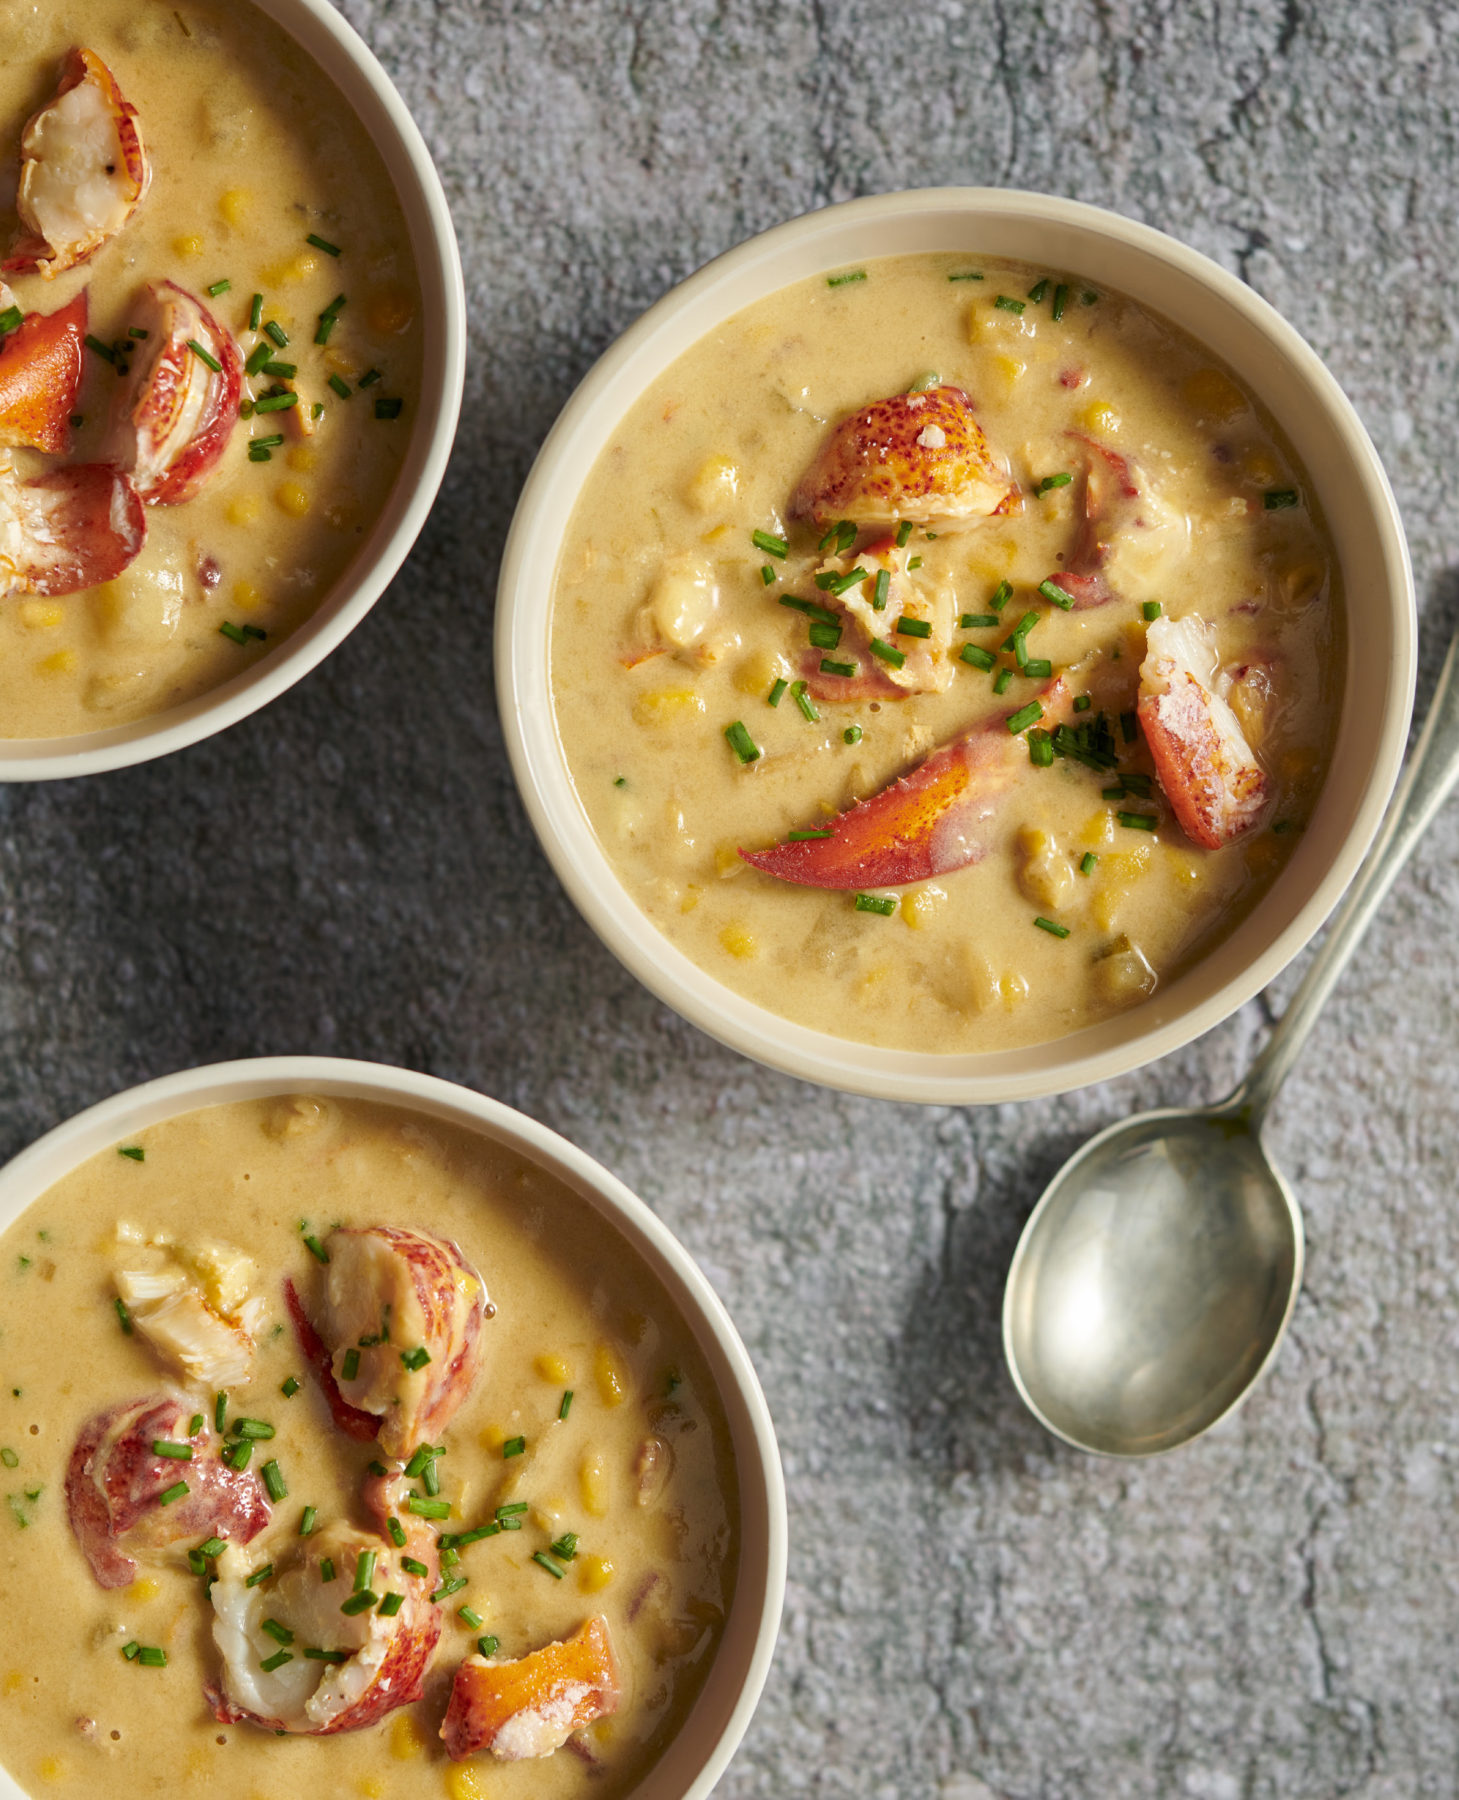 This gluten-free Lobster and Corn Chowder is rich, creamy, and so satisfying that you would never know it’s made in the Instant Pot in under 45 minutes!